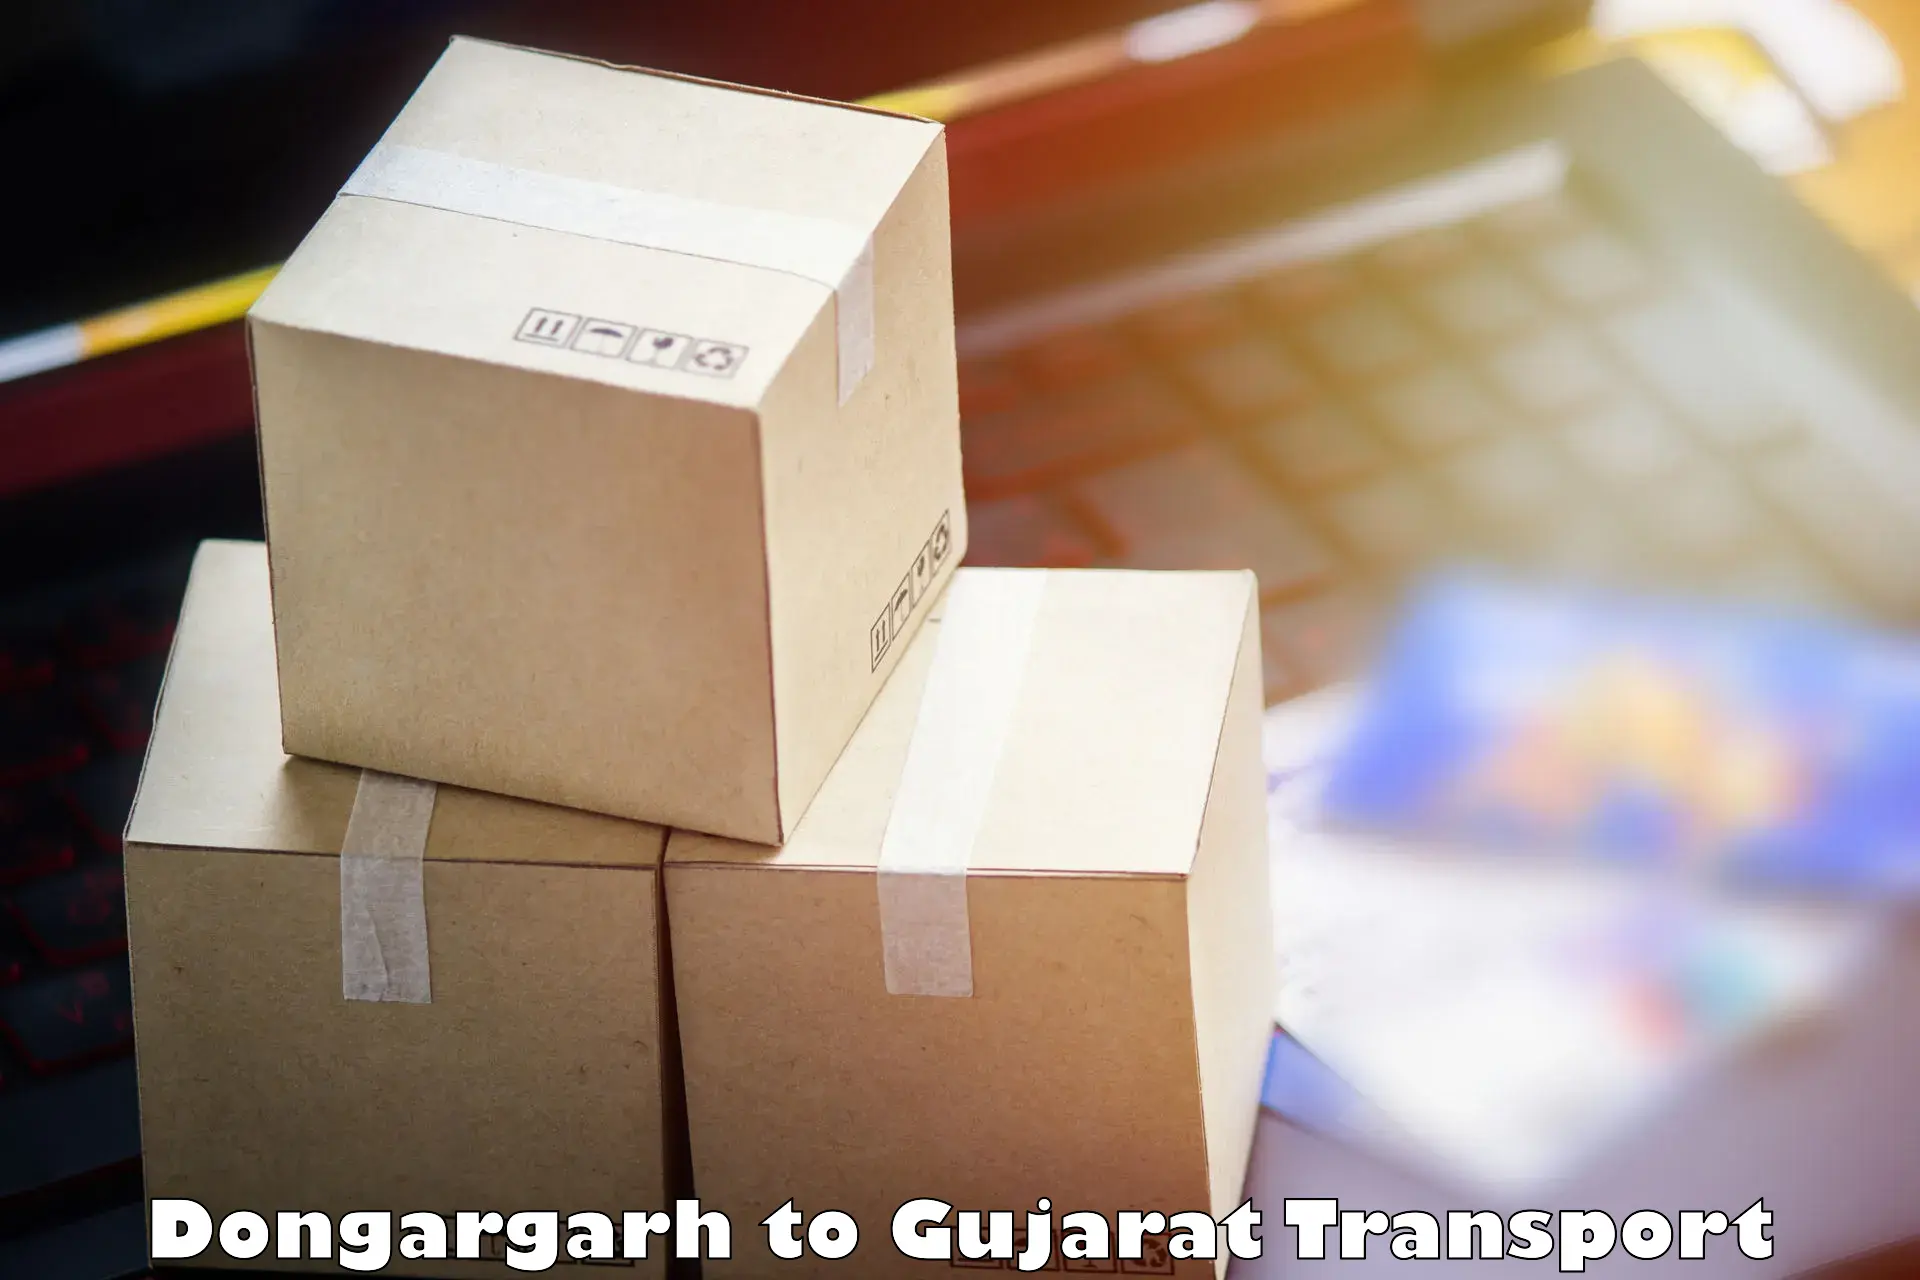 Road transport online services in Dongargarh to Palitana